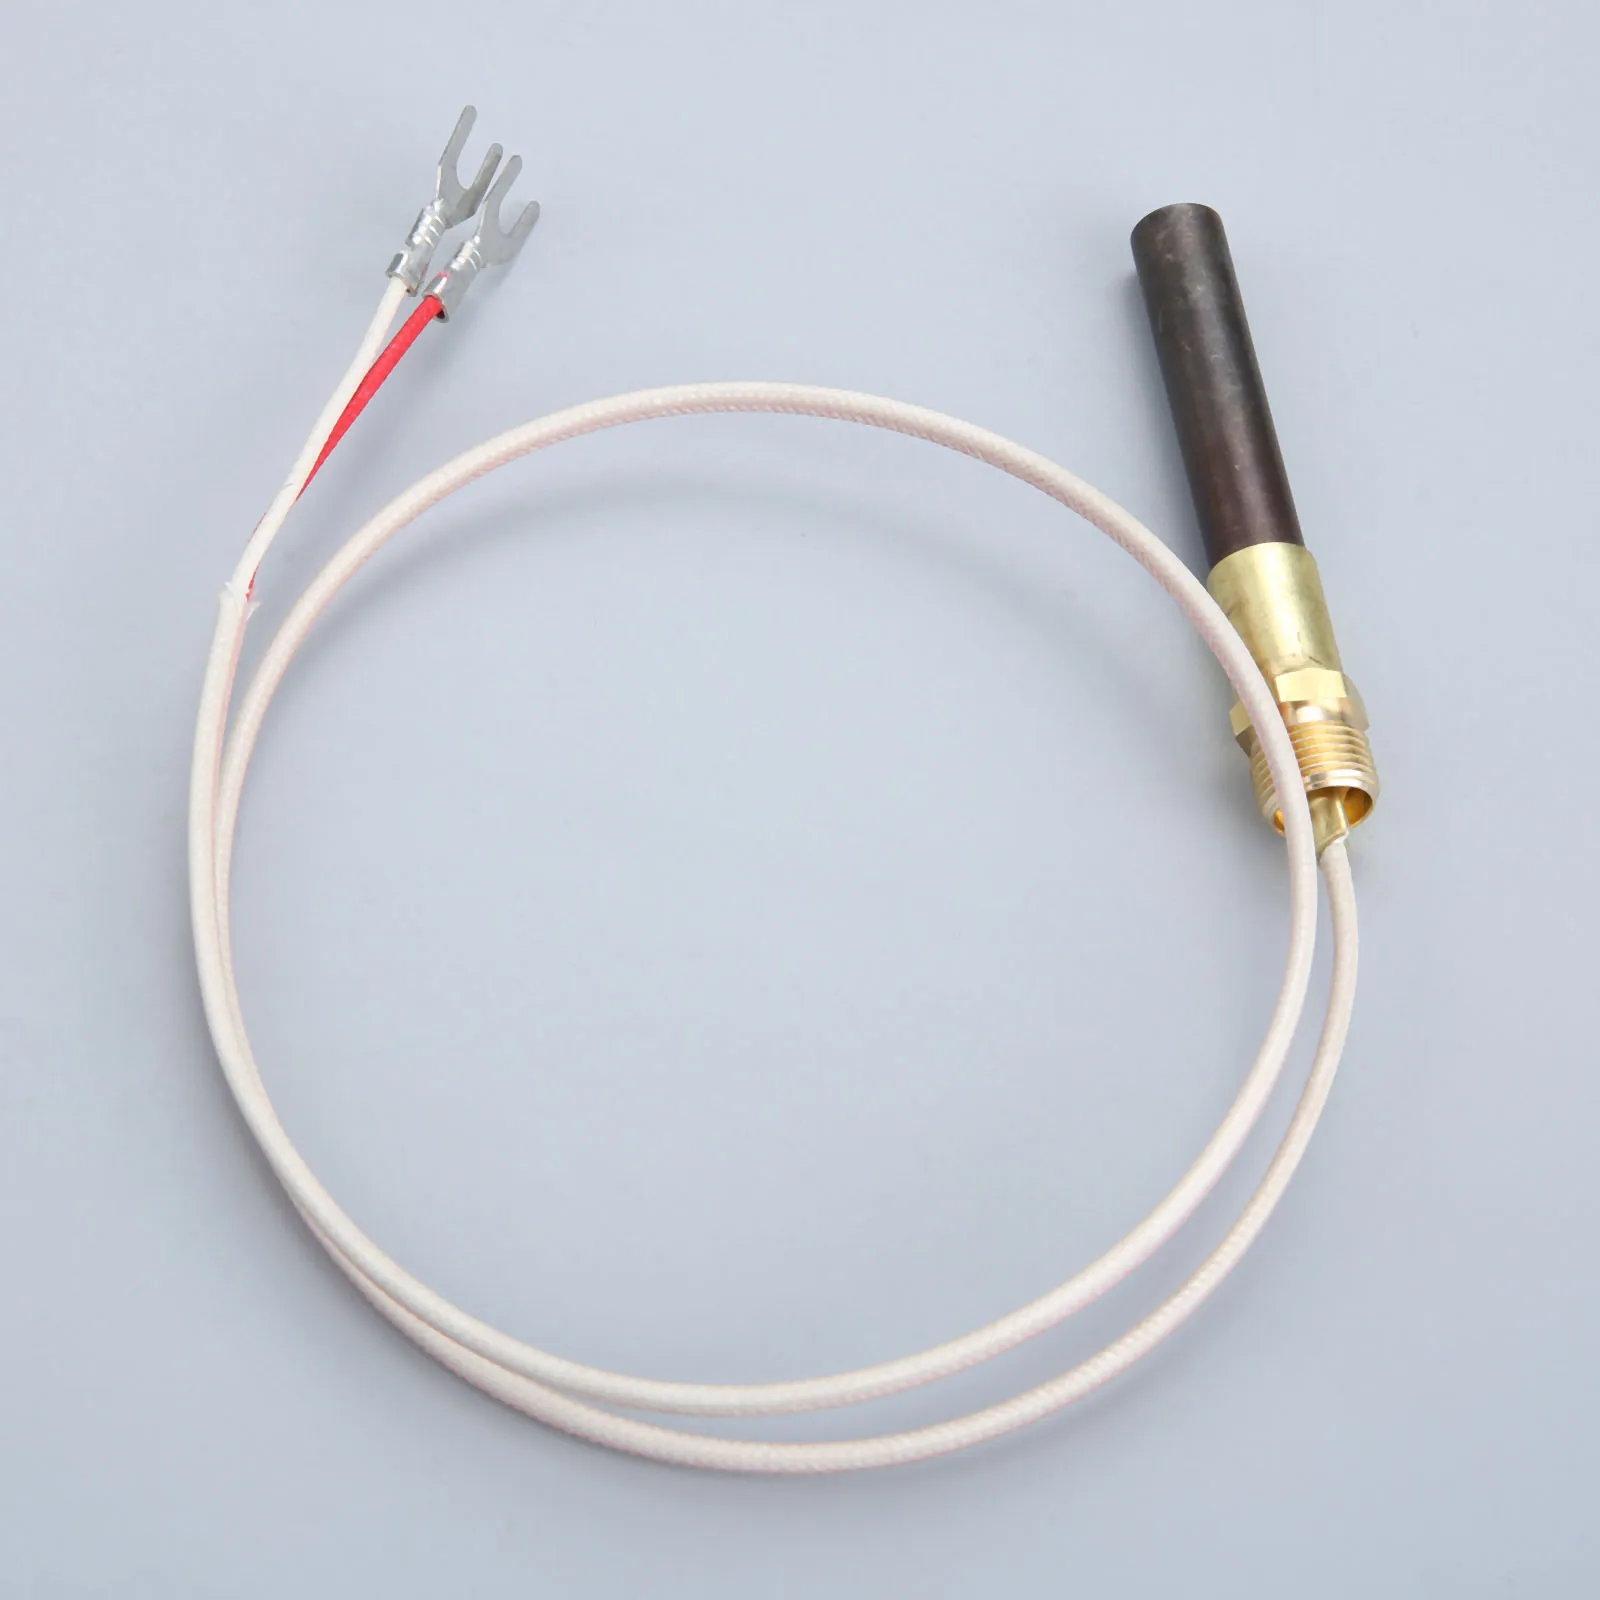 Details about   Propane Gas Fireplace750 Millivolt Replacement Thermopile 24"Glass Fiber Wire 